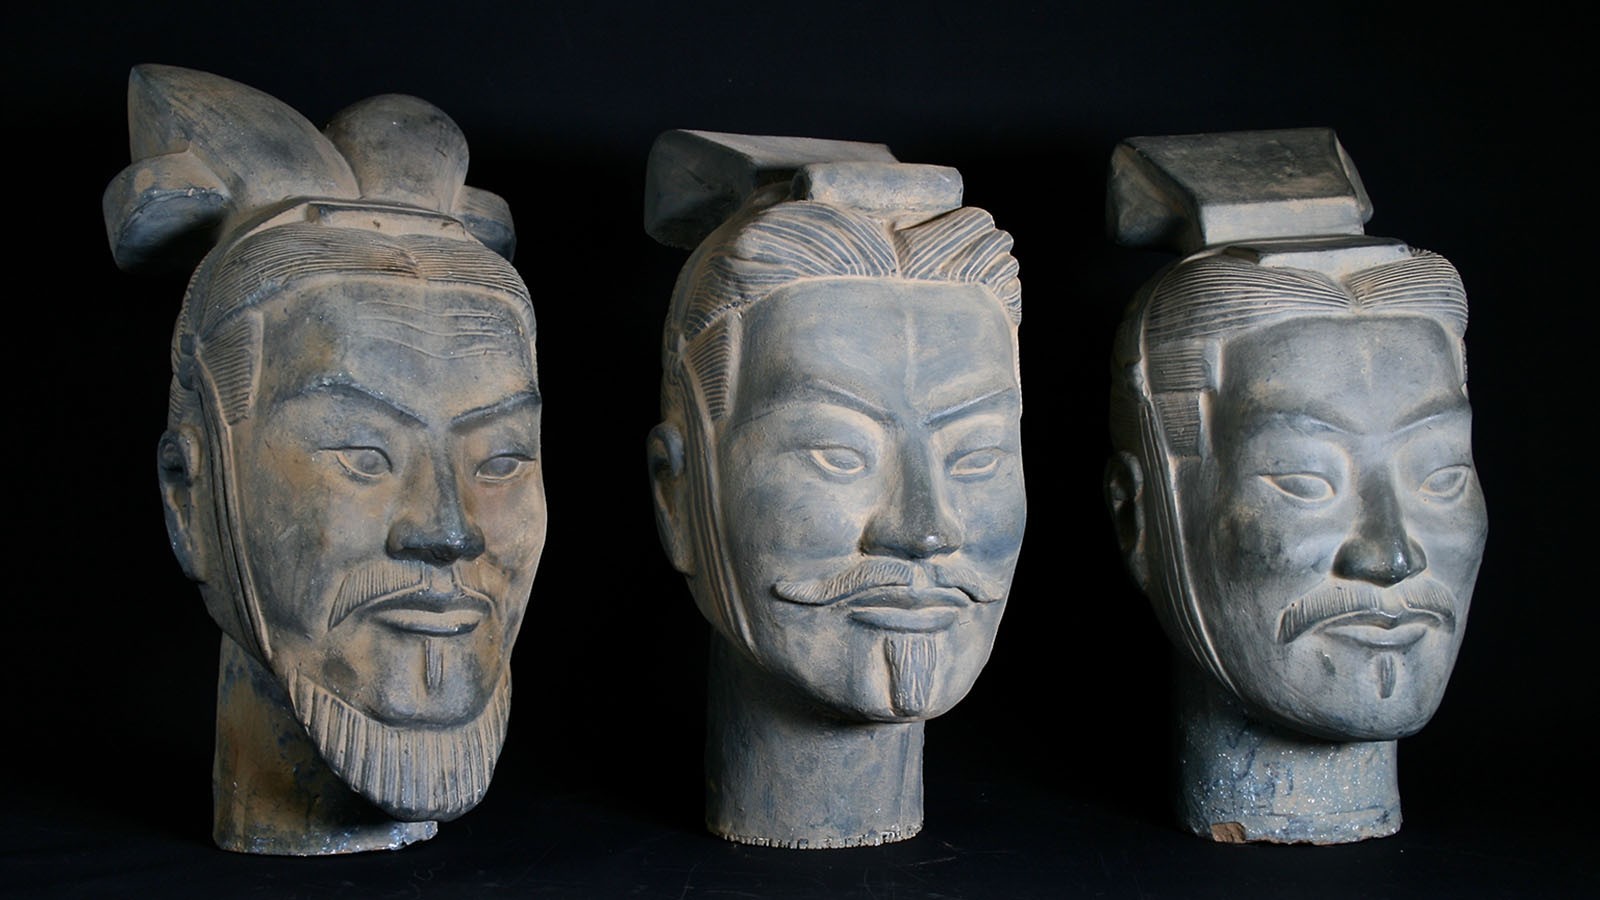 One of these three Terracotta Warrior heads is 3D printed 